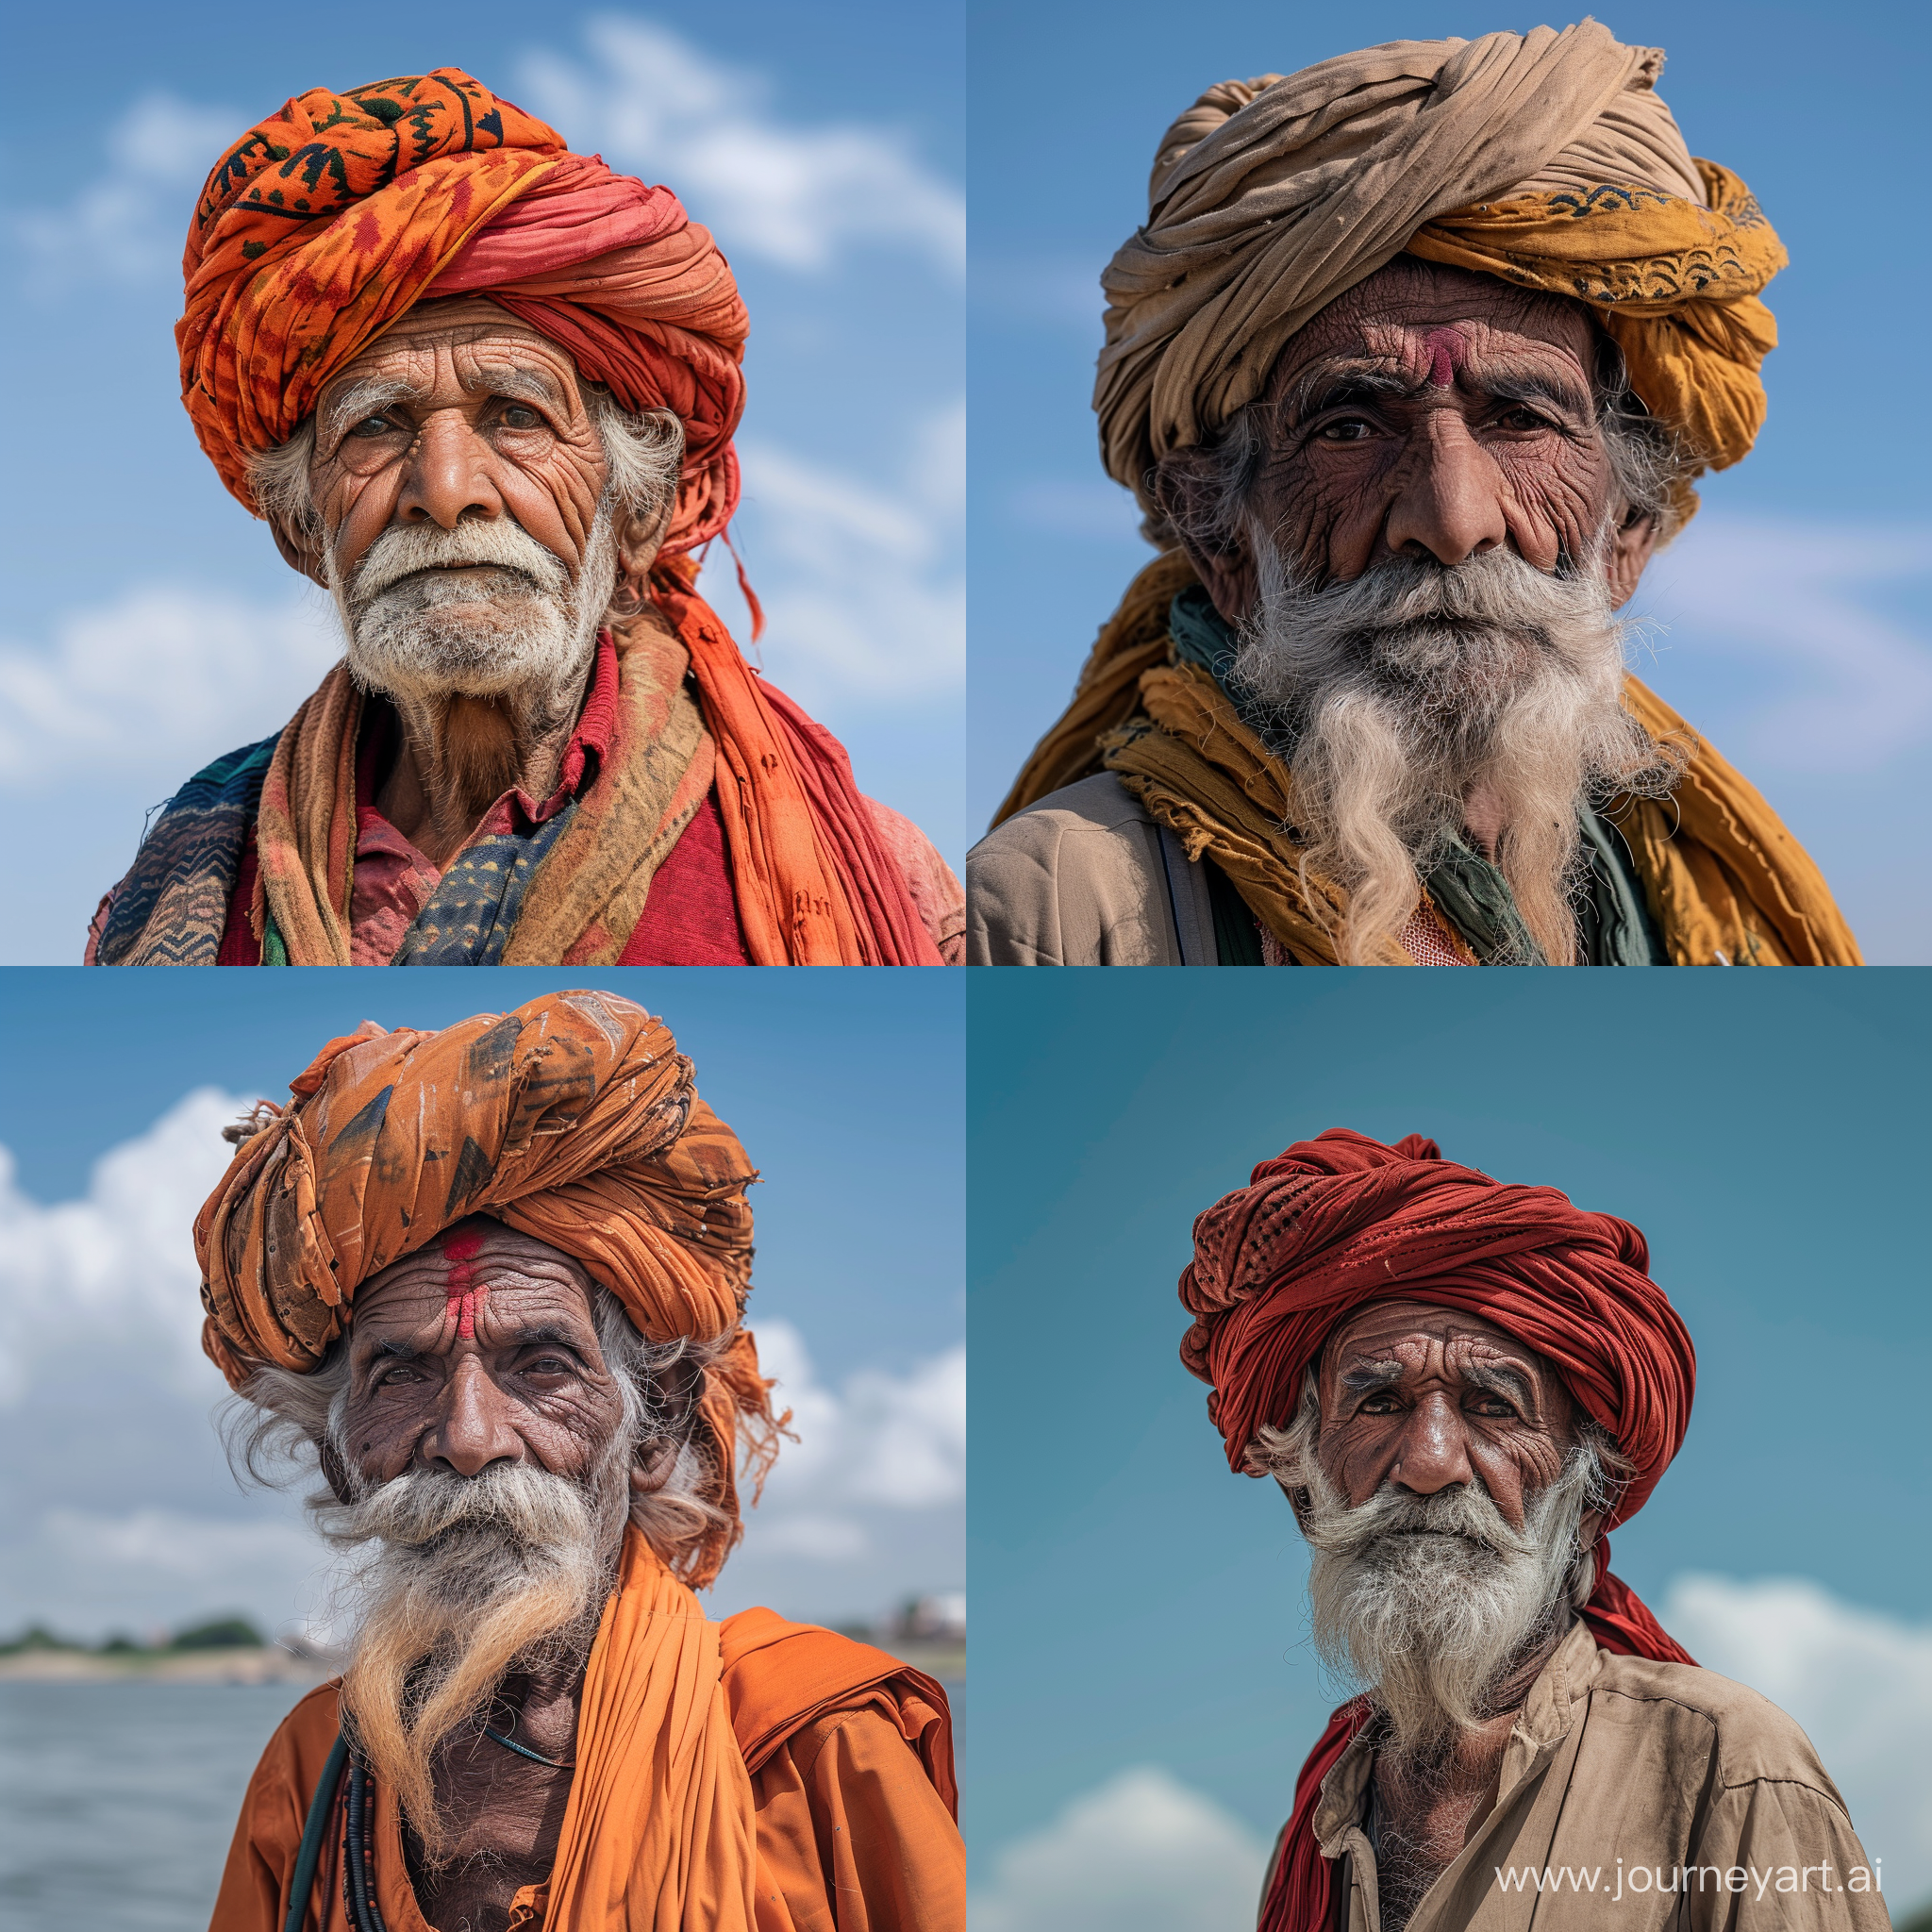  very old rabari rajasthan with turban  standing for the ganges by bleu sky     normal angle  fujii xt2 camera